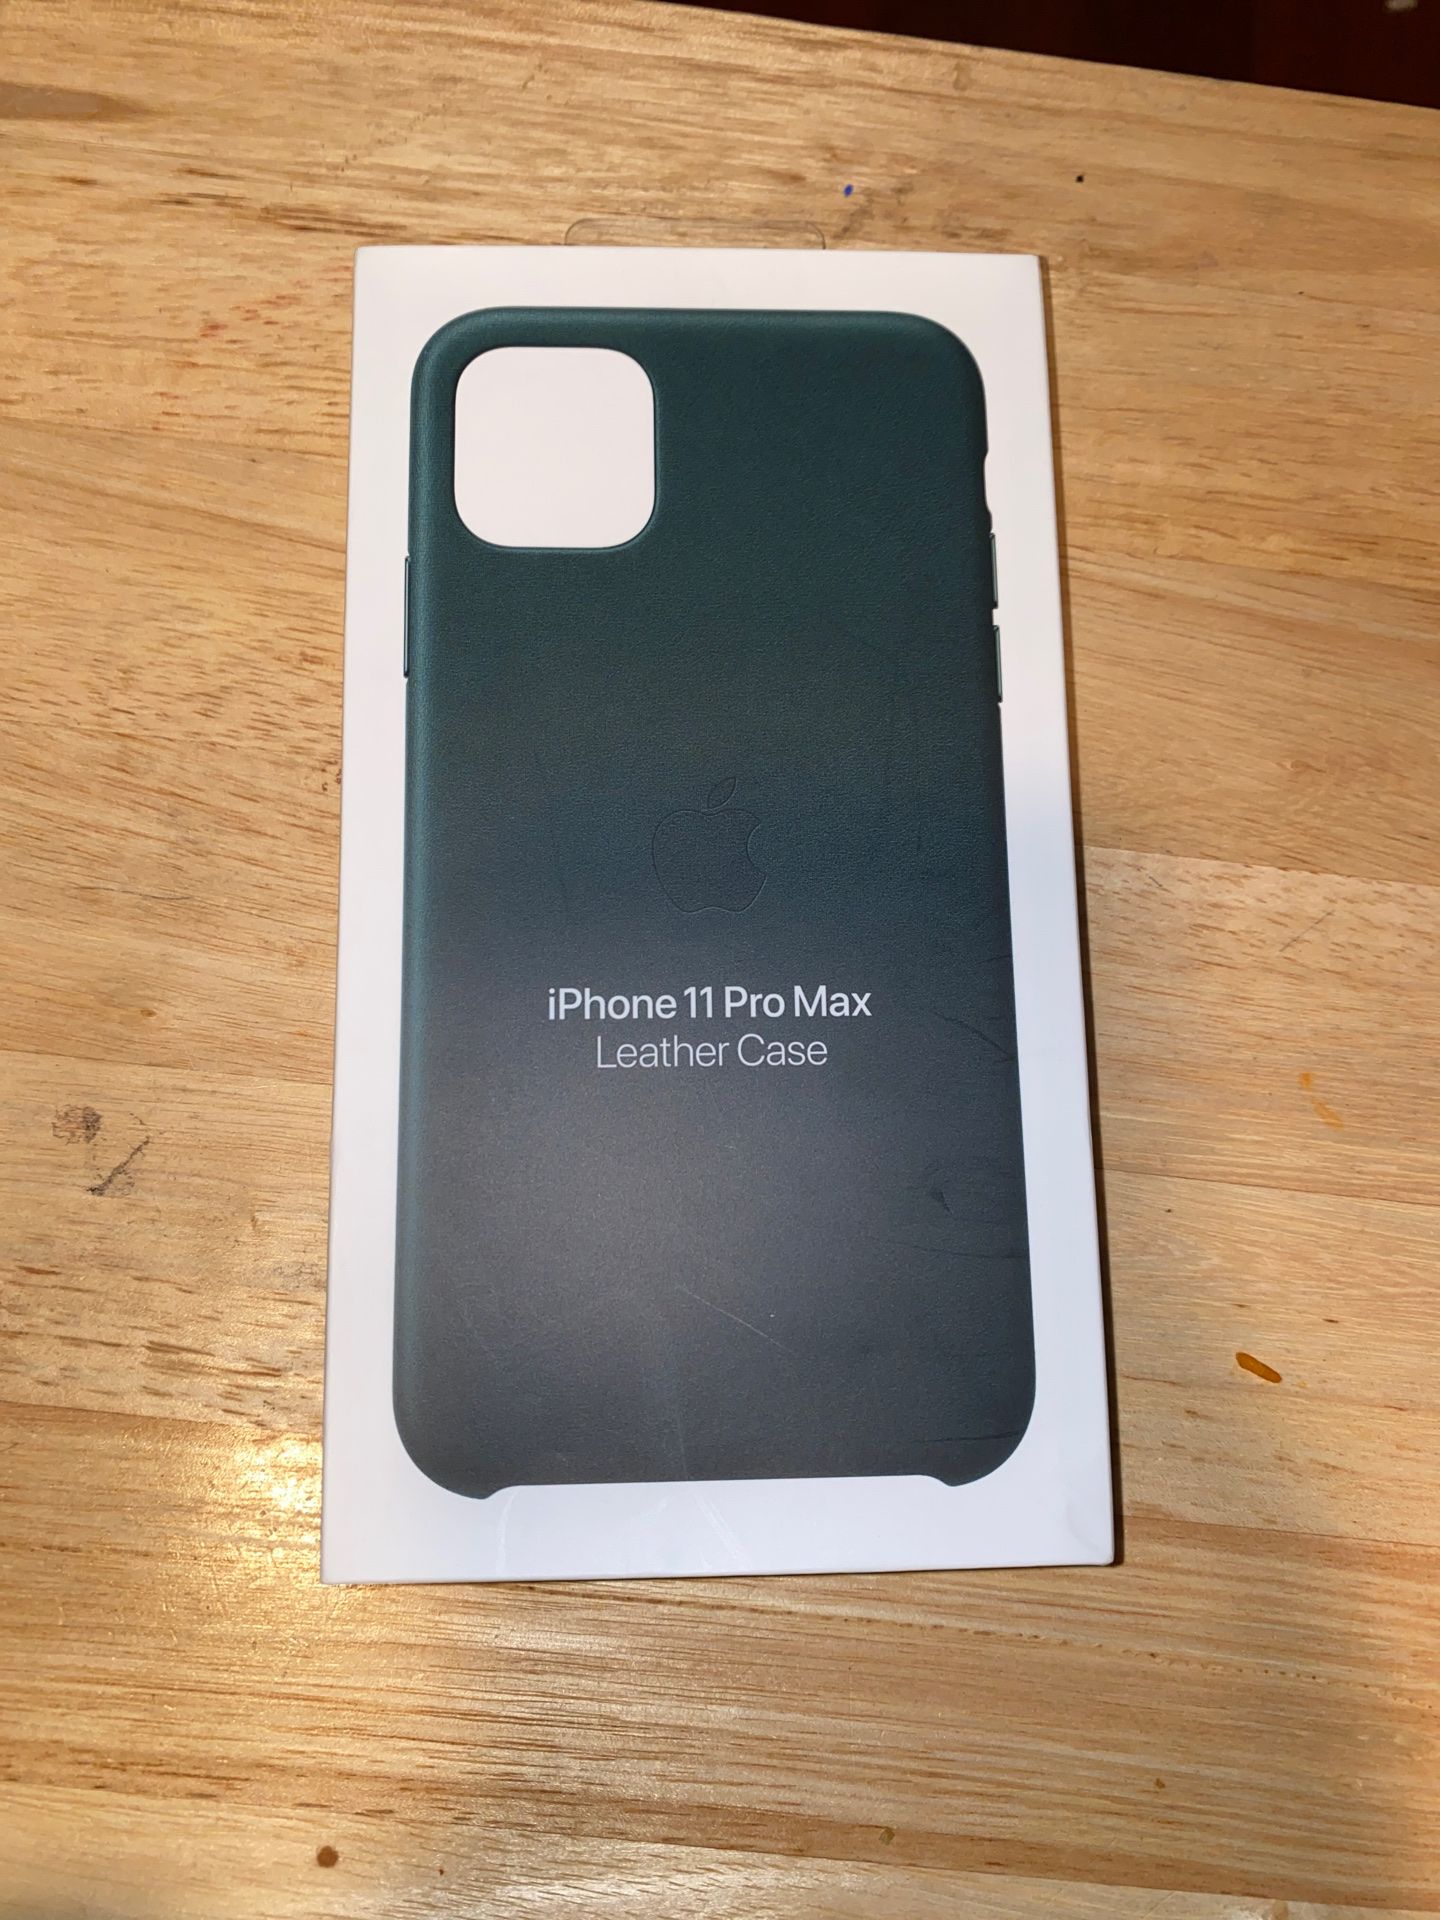 iPhone 11 Pro Max Apple leather case